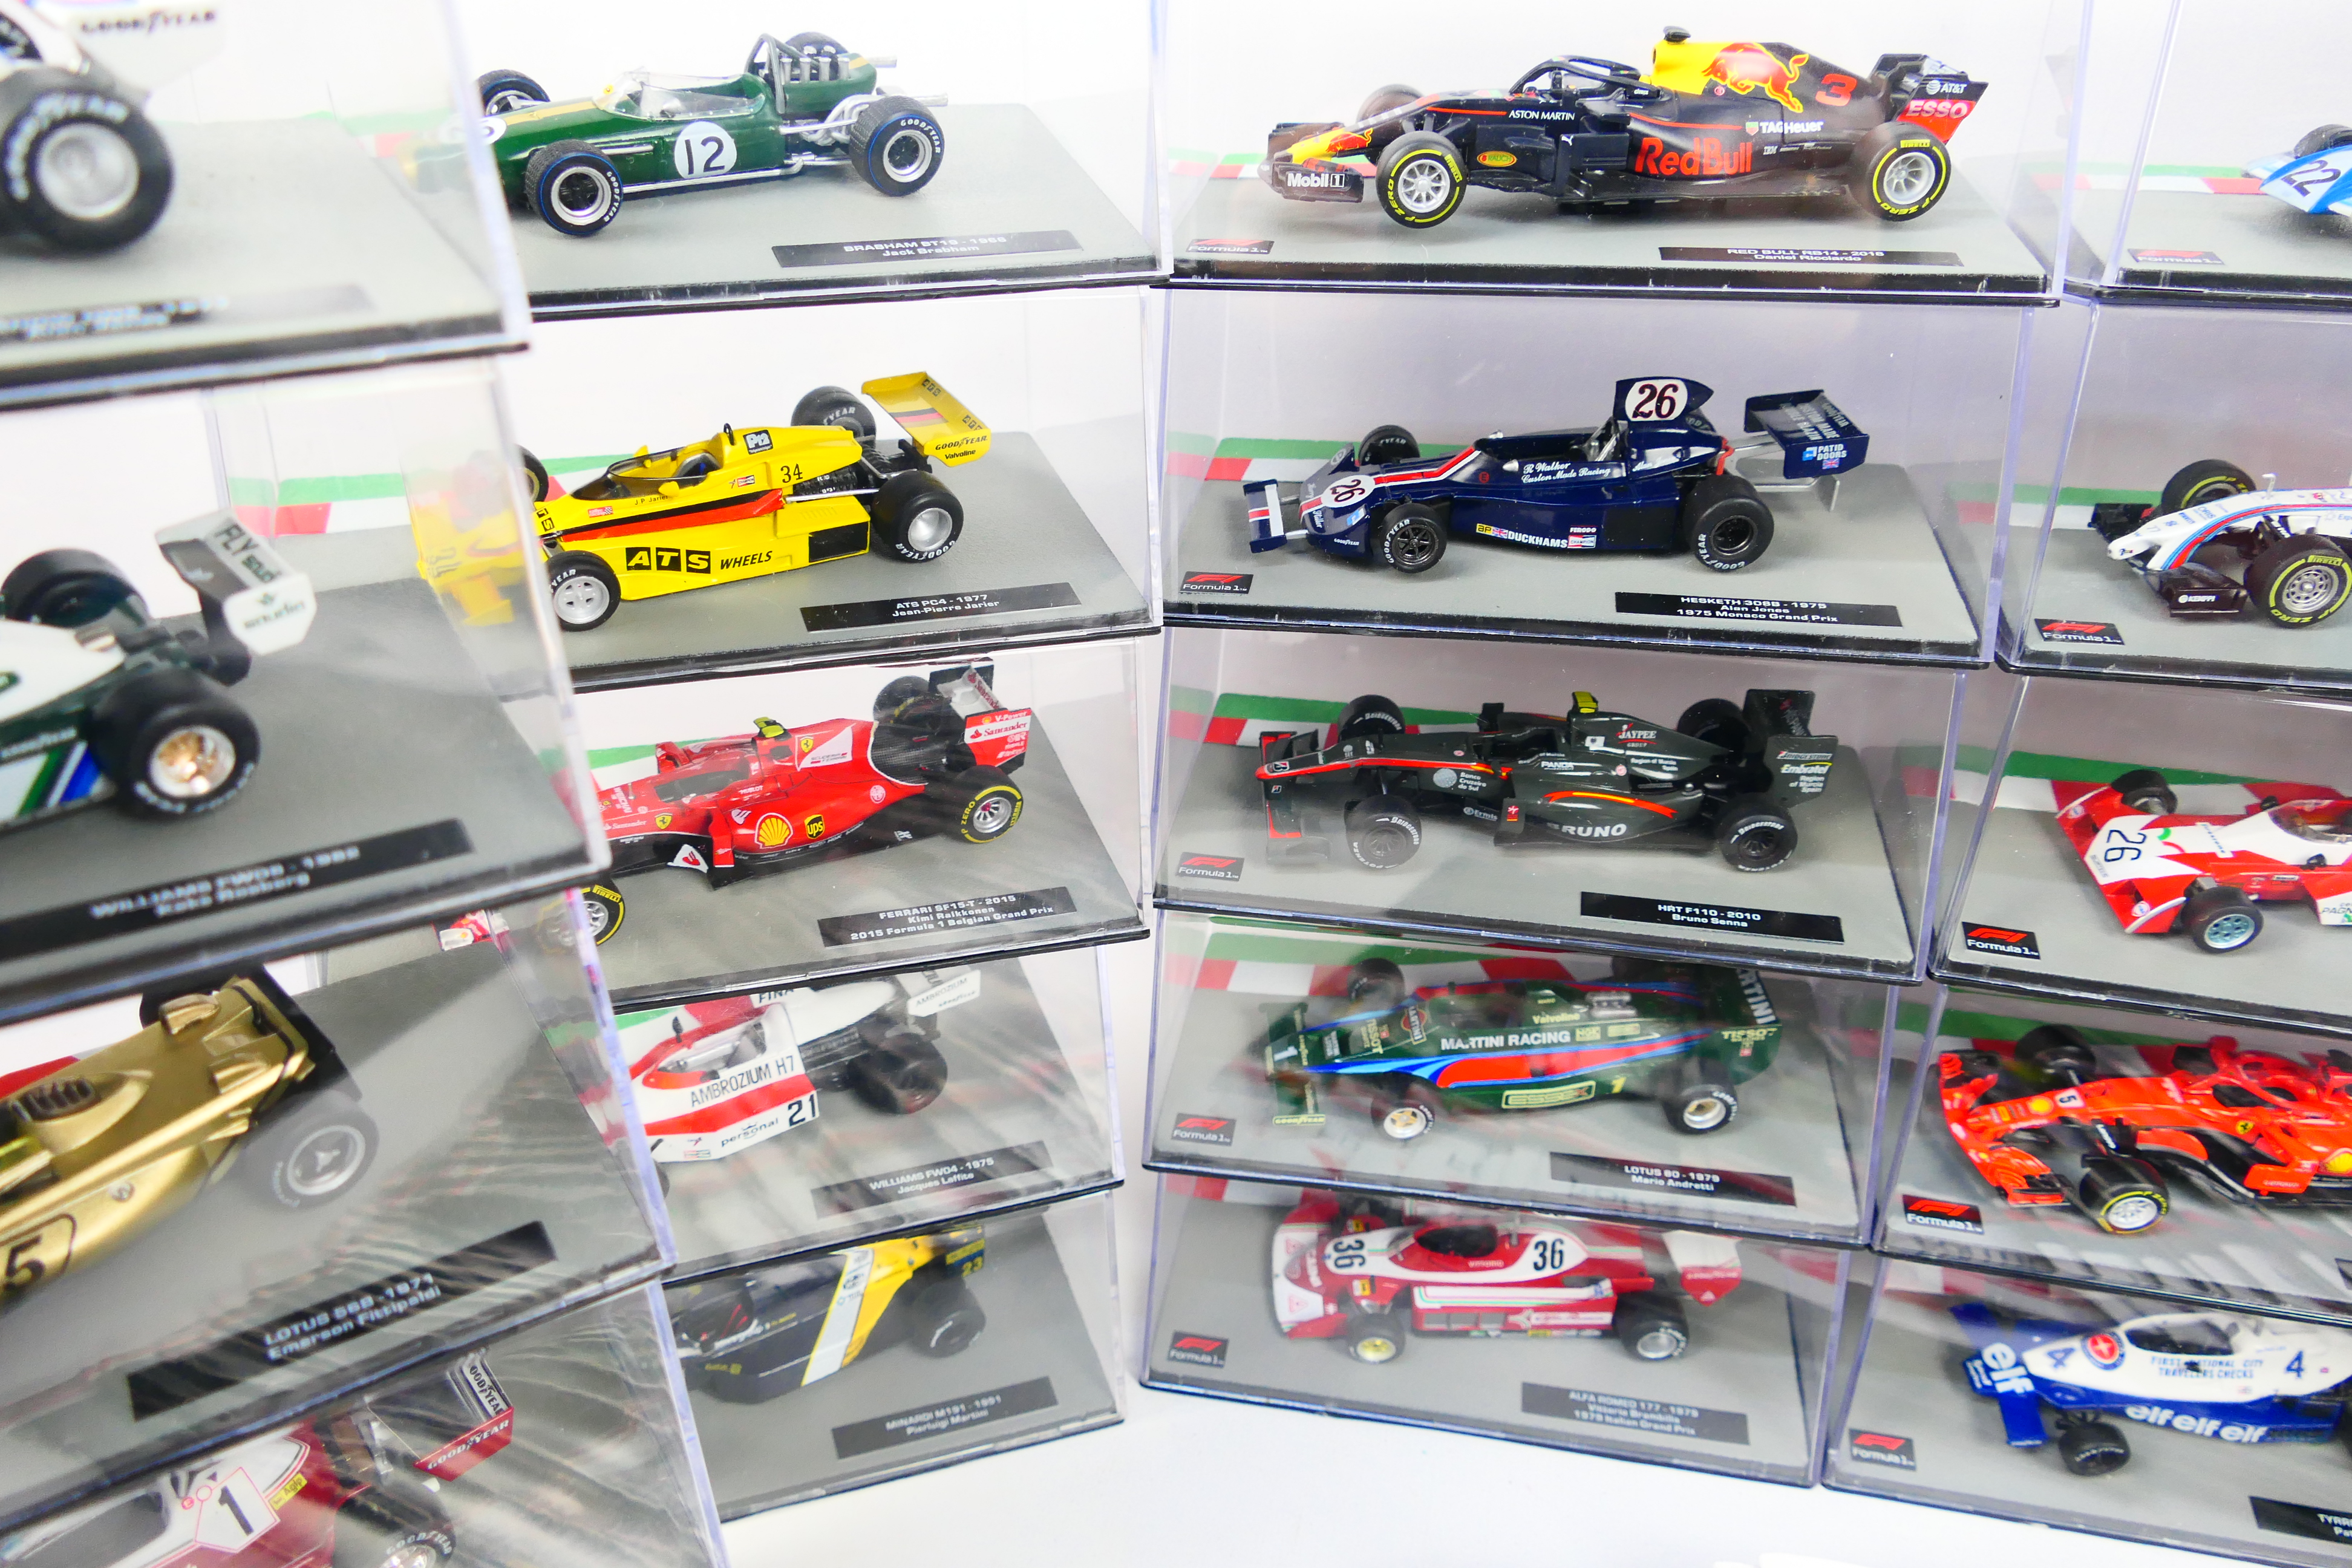 Centauria - Panini - Formula 1 - 35 x models from Formula 1 The Car Collection with the cars and - Image 8 of 14